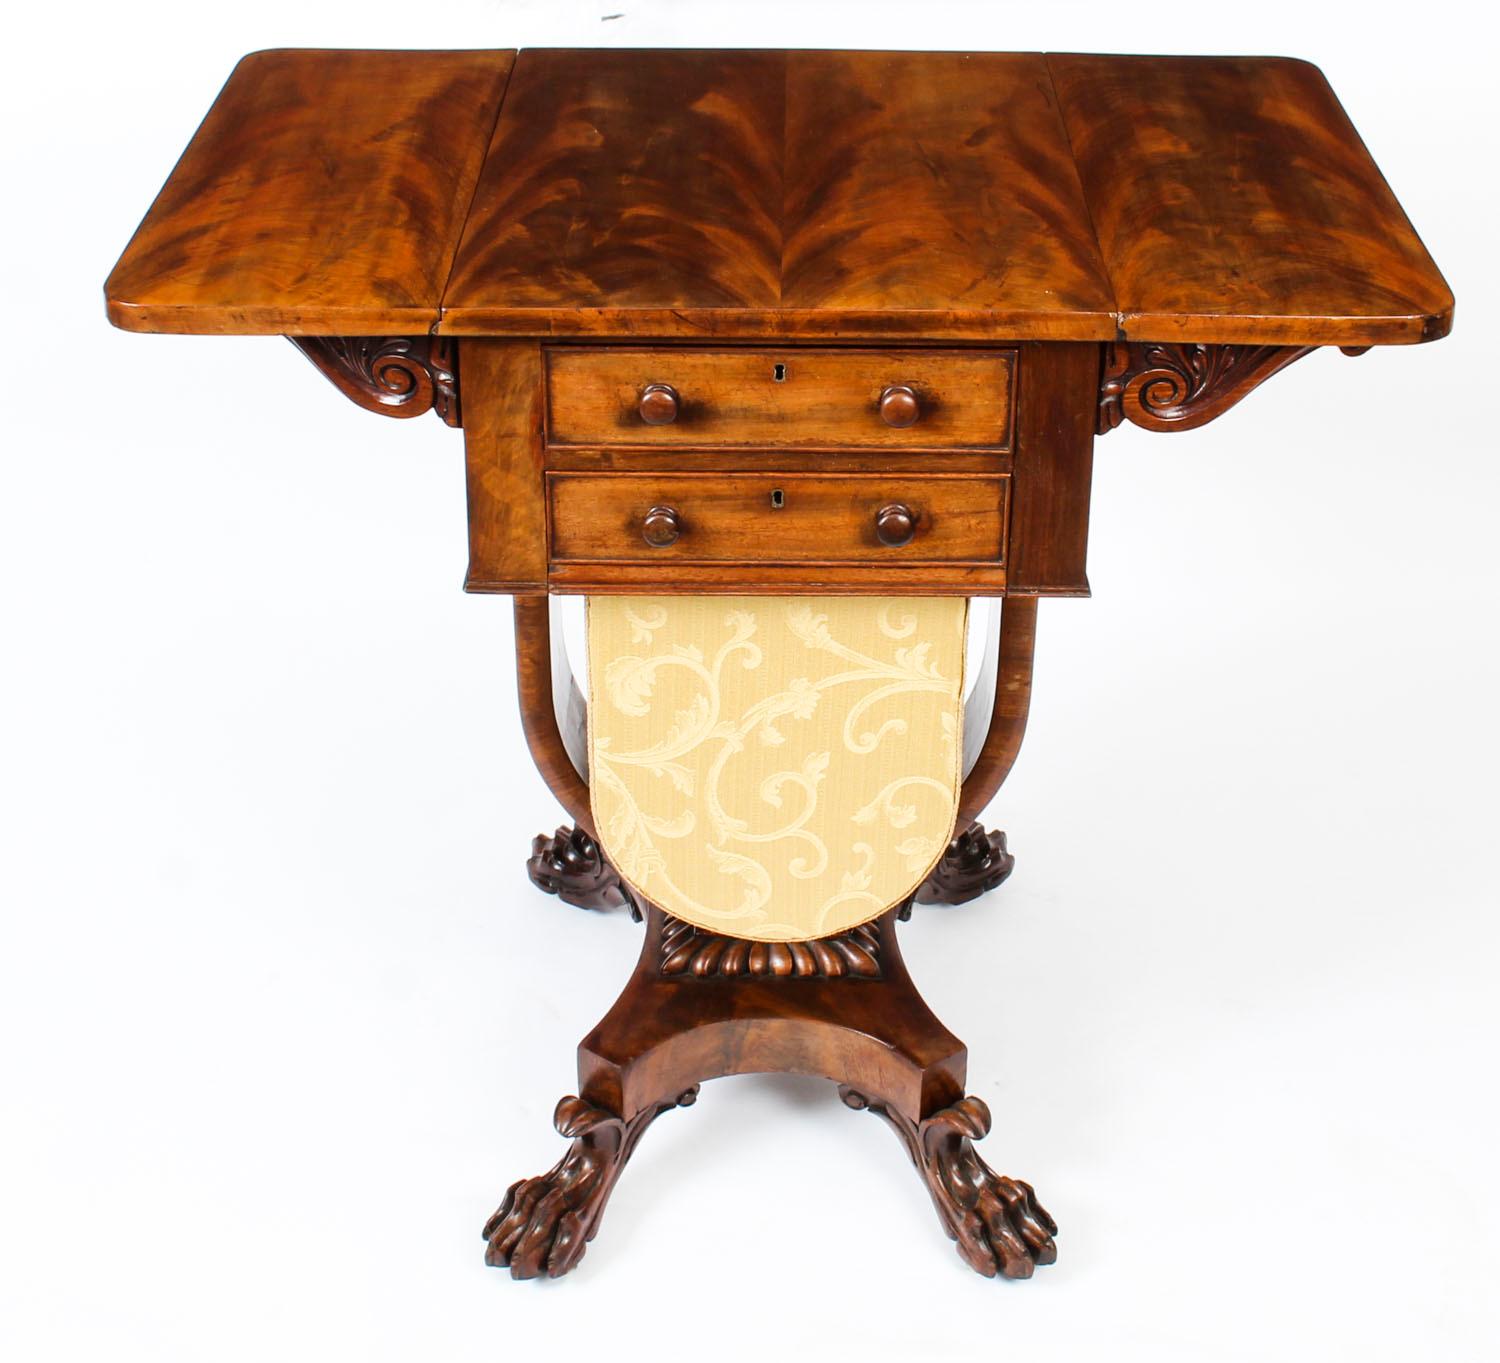 English Antique William IV Drop-Leaf Work Occasional Table Flame Mahogany, 19th Century For Sale